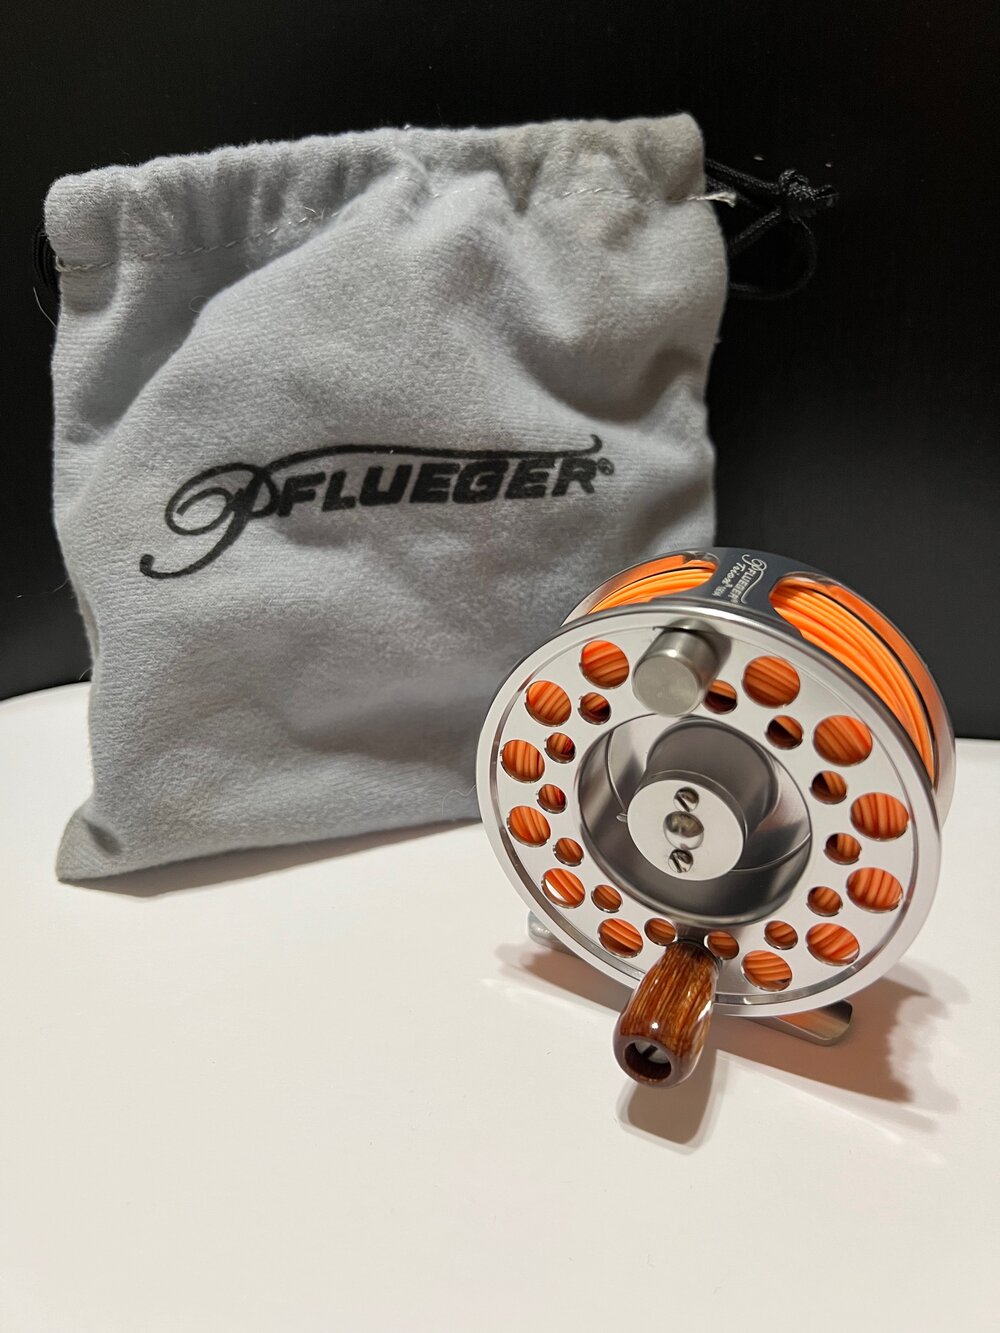 Pflueger Trion #1934 Fly reel with carry bag — VINTAGE FISHING REELS